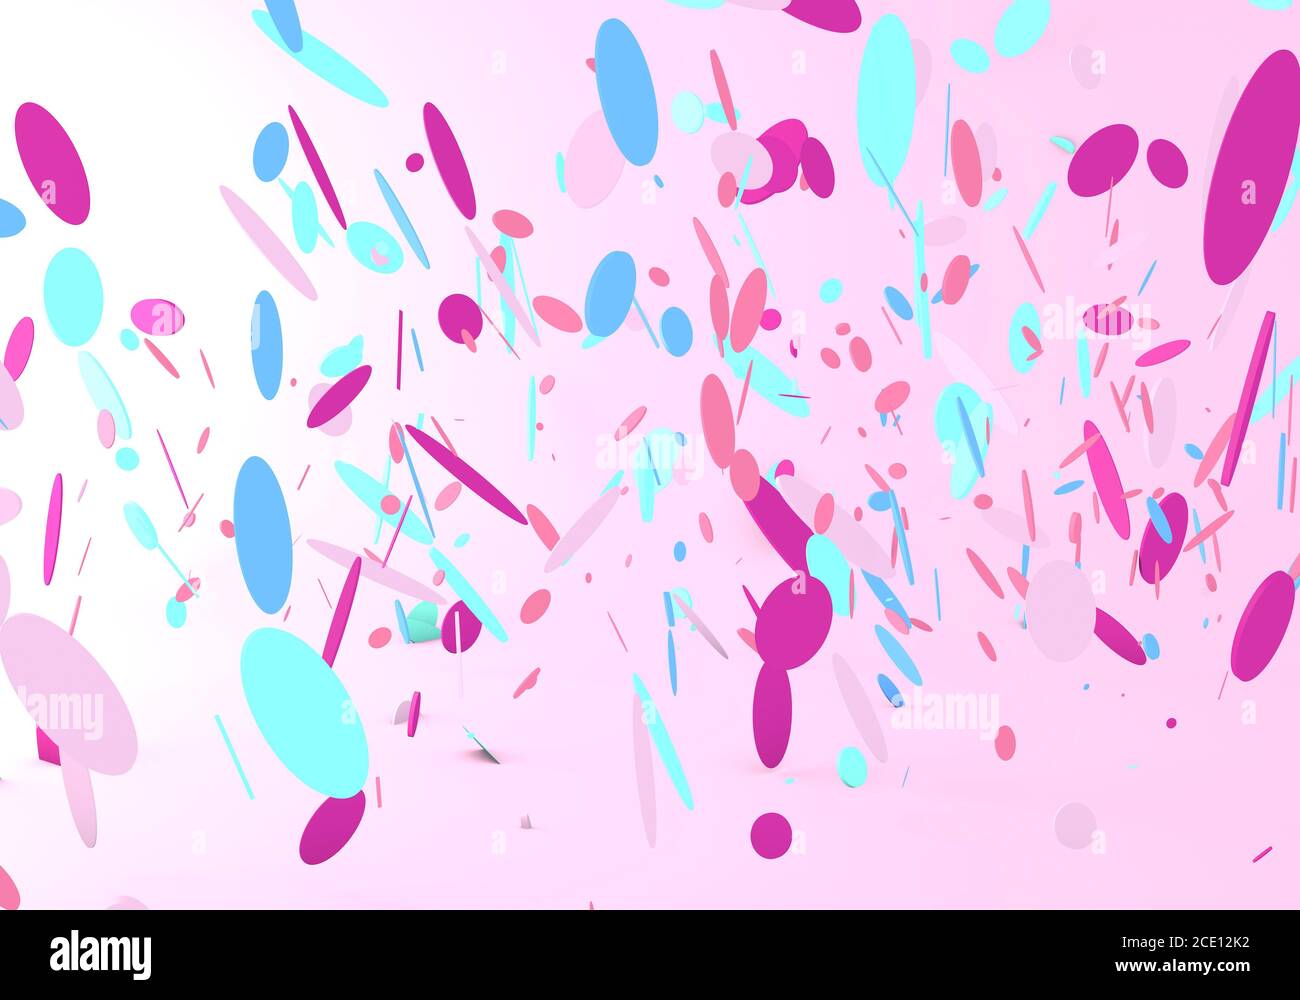 3d render of confetti falling on a pink background Stock Photo